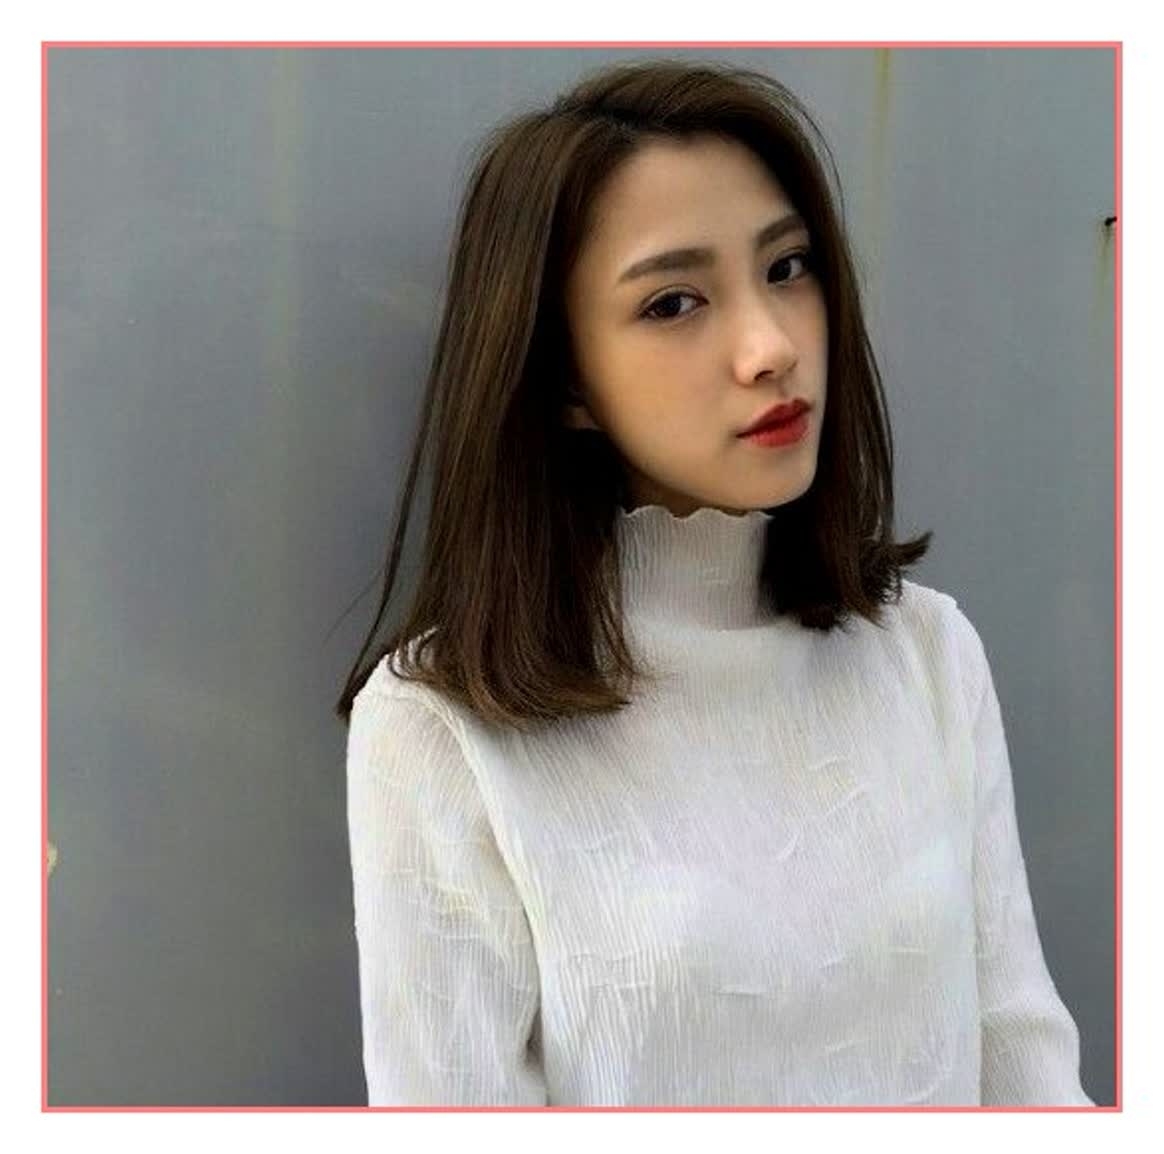 28+ Albums Of Cute Korean Hairstyles For Short Hair | Explore for Cute Korean Hairstyles For Short Hair